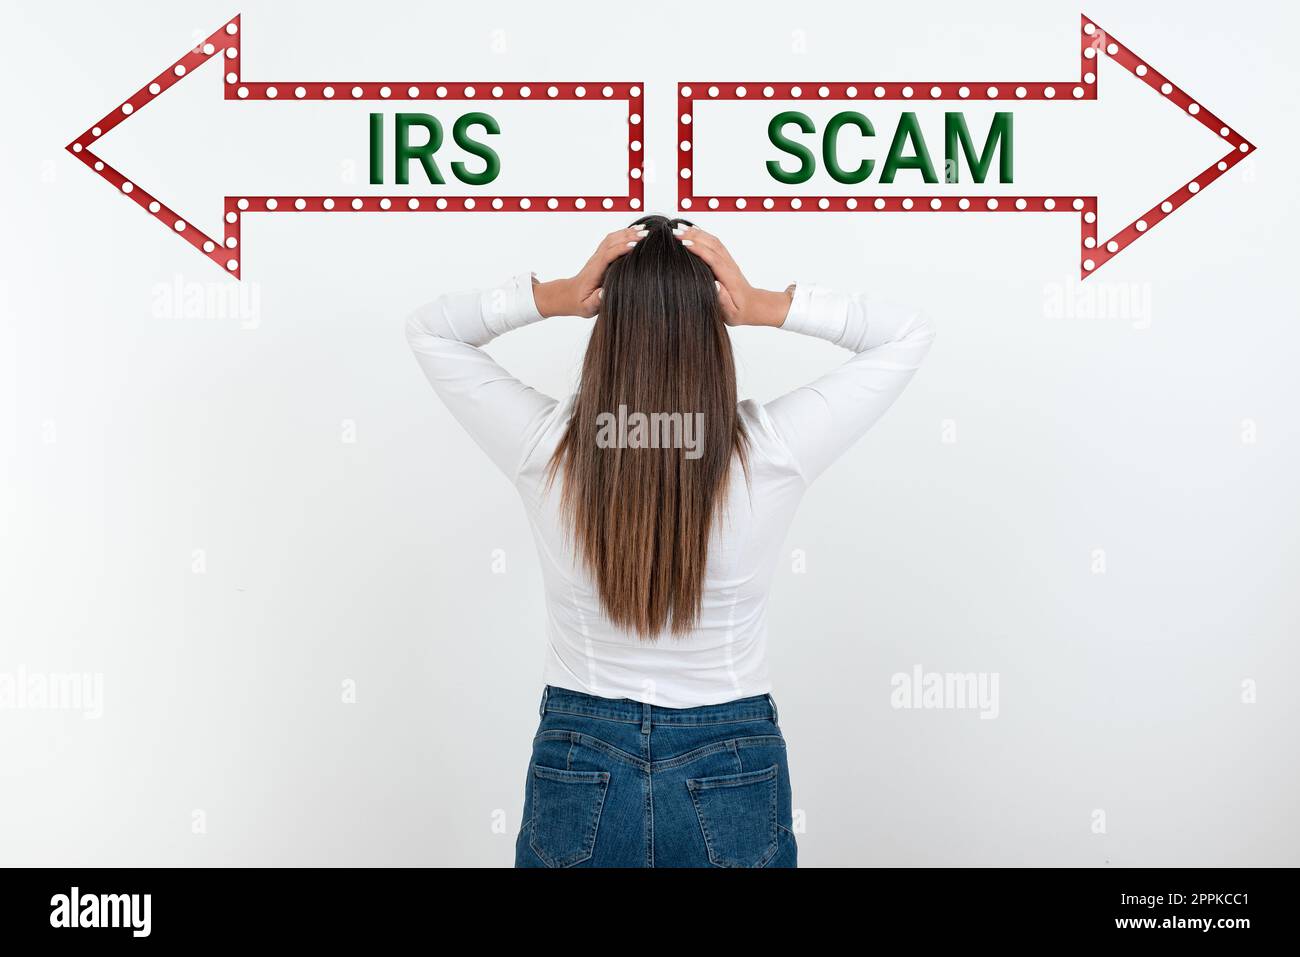 Text caption presenting Irs Scam. Concept meaning targeted taxpayers by pretending to be Internal Revenue Service Stock Photo